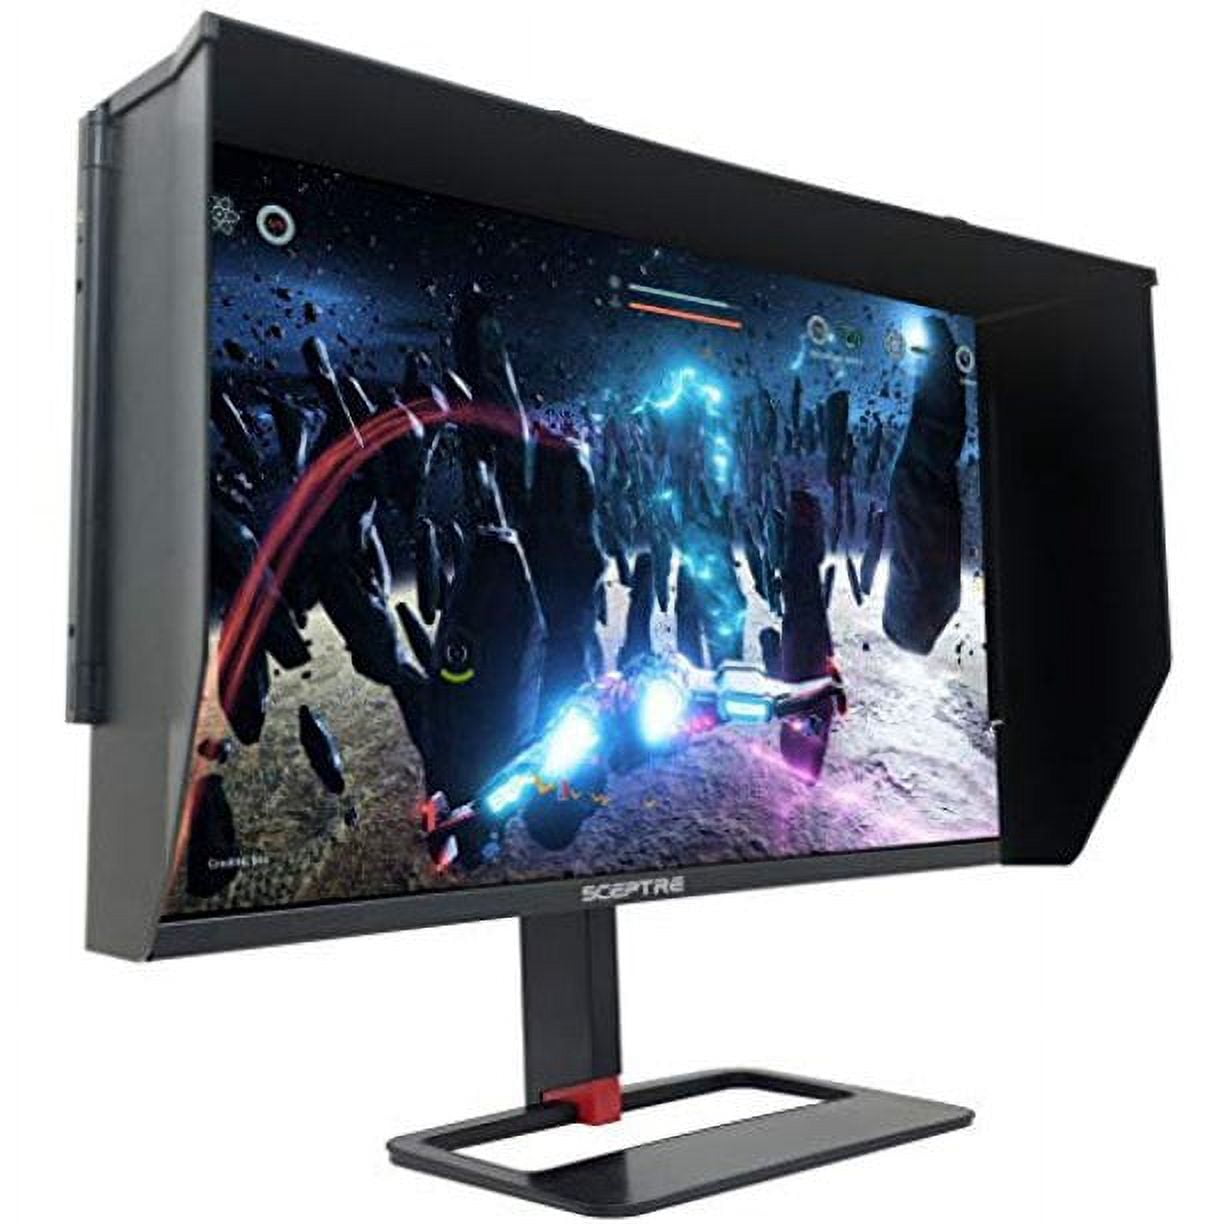 Sceptre 32 inch QHD IPS LED Monitor HDR400 2560x1440 HDMI DisplayPort up to  144Hz 1ms Height Adjustable, Build-in Speakers Gunmetal Black 2021